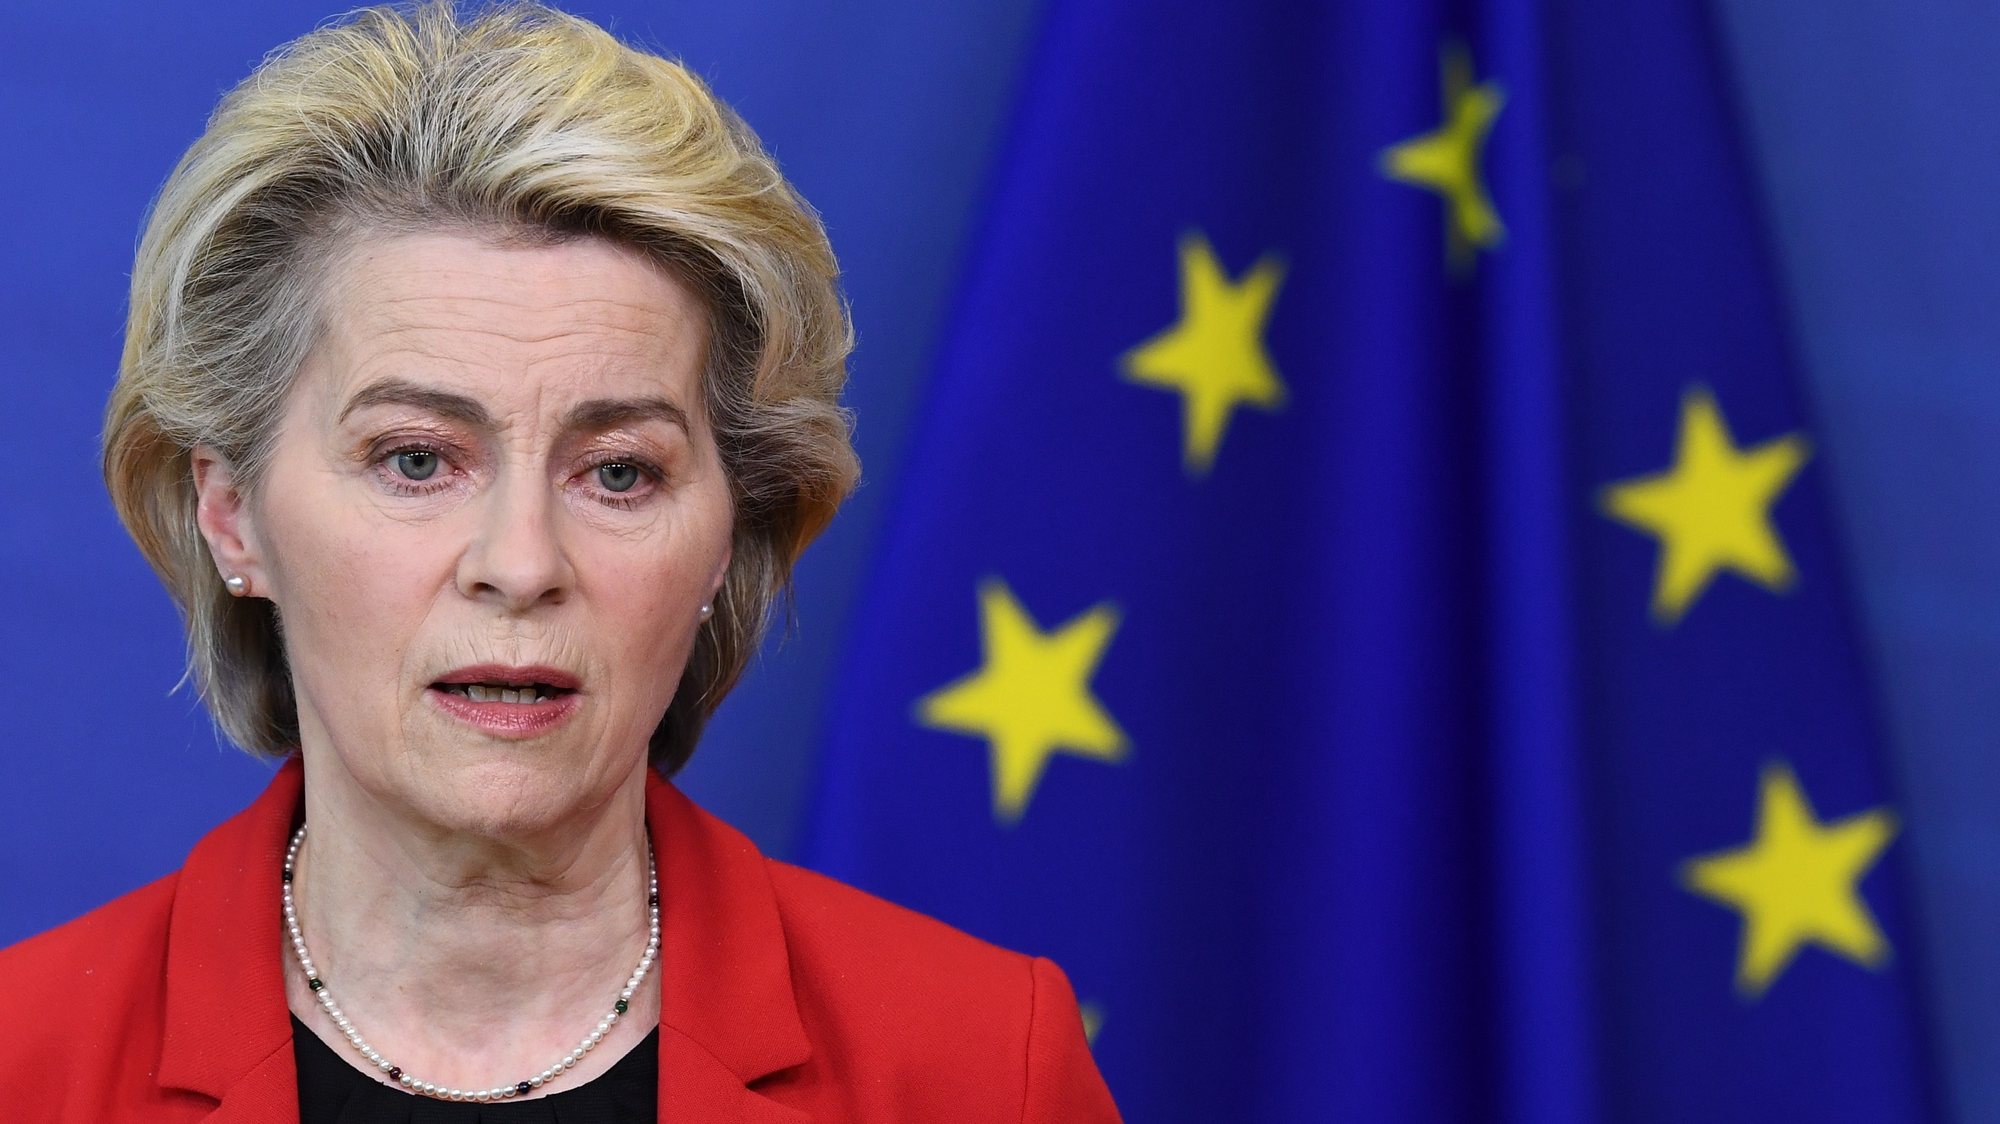 epa09706198 European Commission President Ursula von der Leyen gives a statement on Ukraine at the EU headquarters in Brussels, Belgium, 24 January 2022. The European Union aims to help Ukraine with a 1.2 billion euro financial aid package in grants and loans to mitigate the effects of the conflict with Russia, von der Leyen said.  EPA/JOHN THYS / POOL